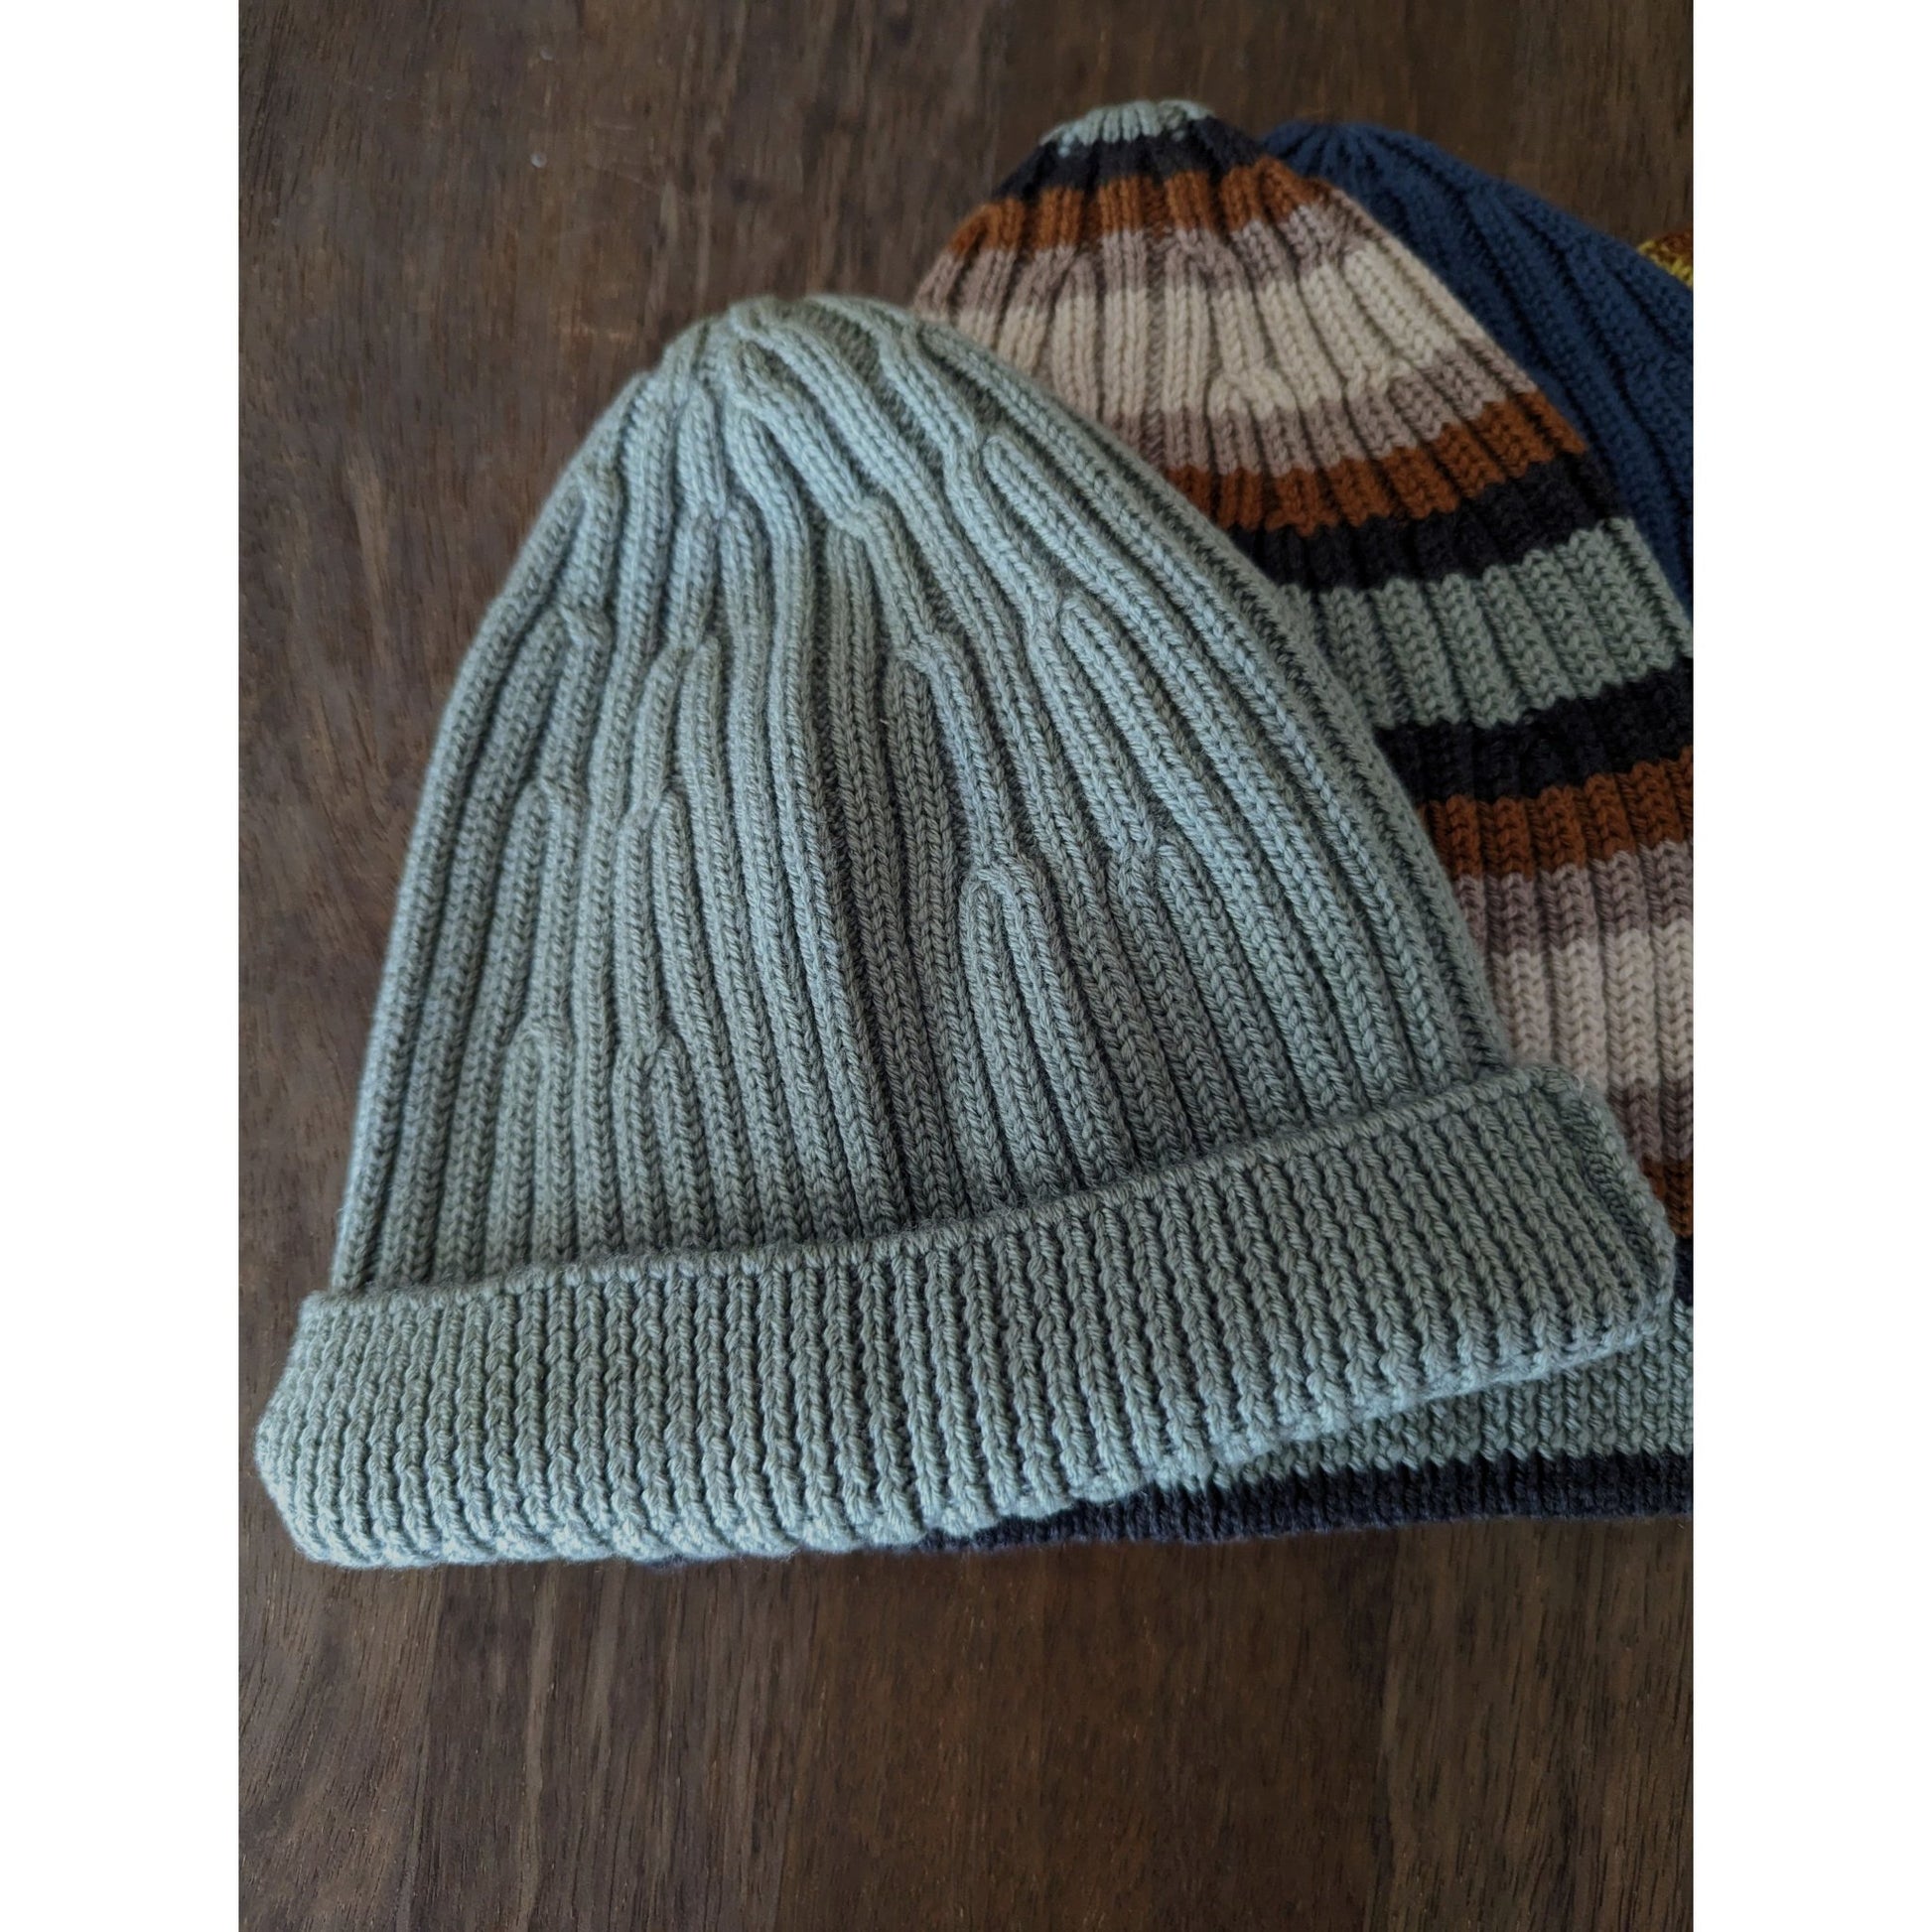 Mabli - Coblyn Beanie - Kids and Adults - Nature's Wild Child